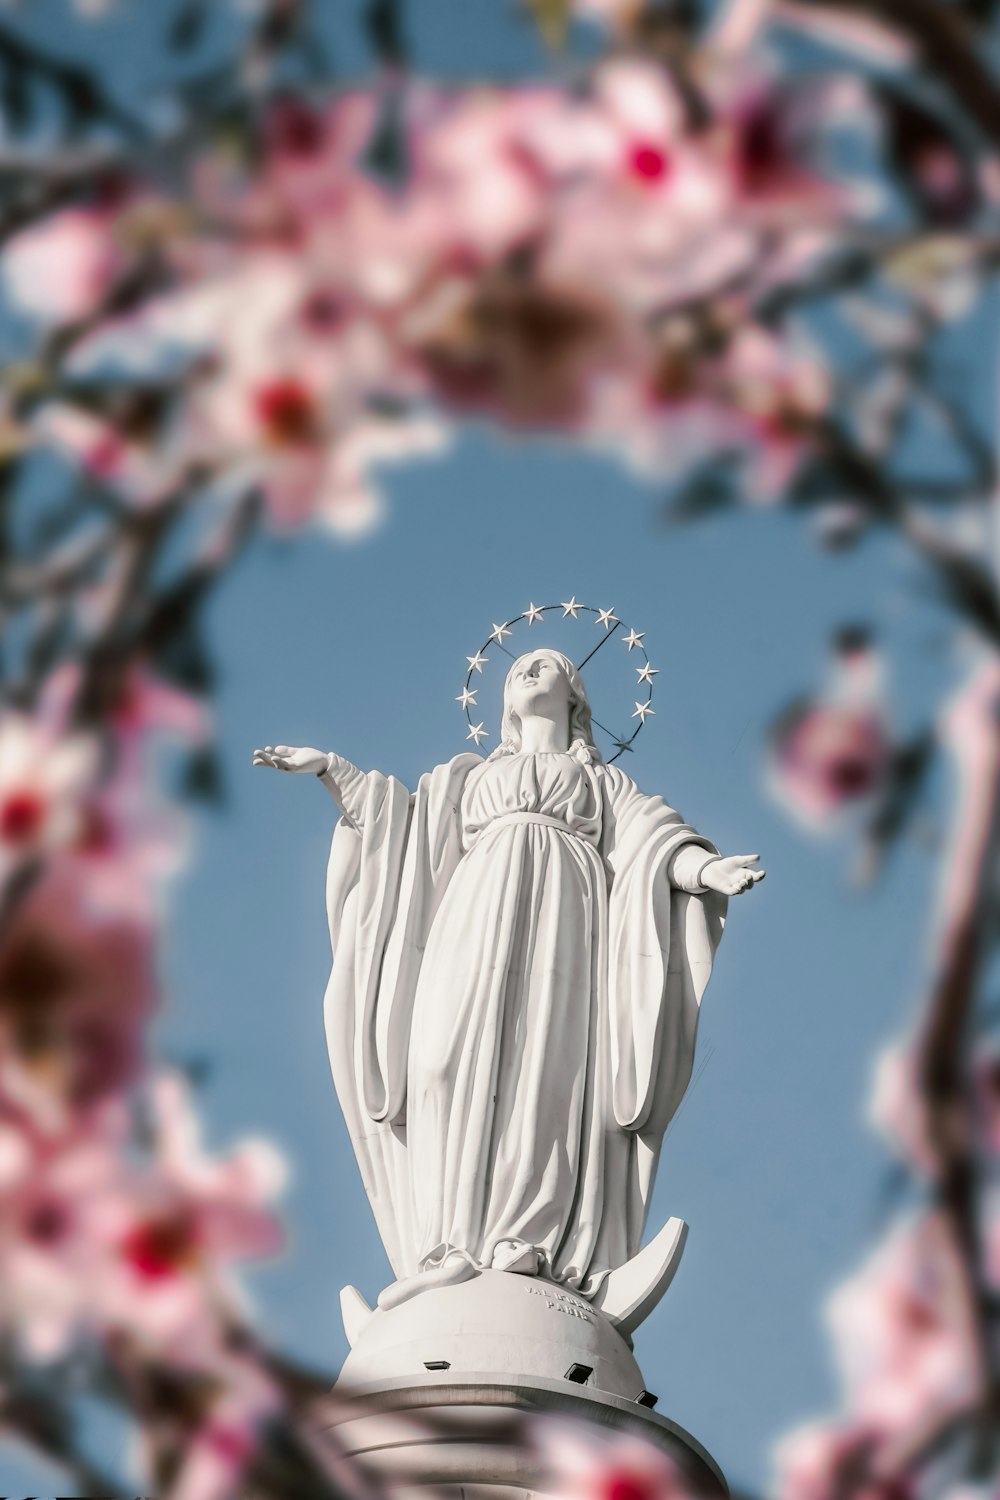 a statue of jesus surrounded by pink flowers